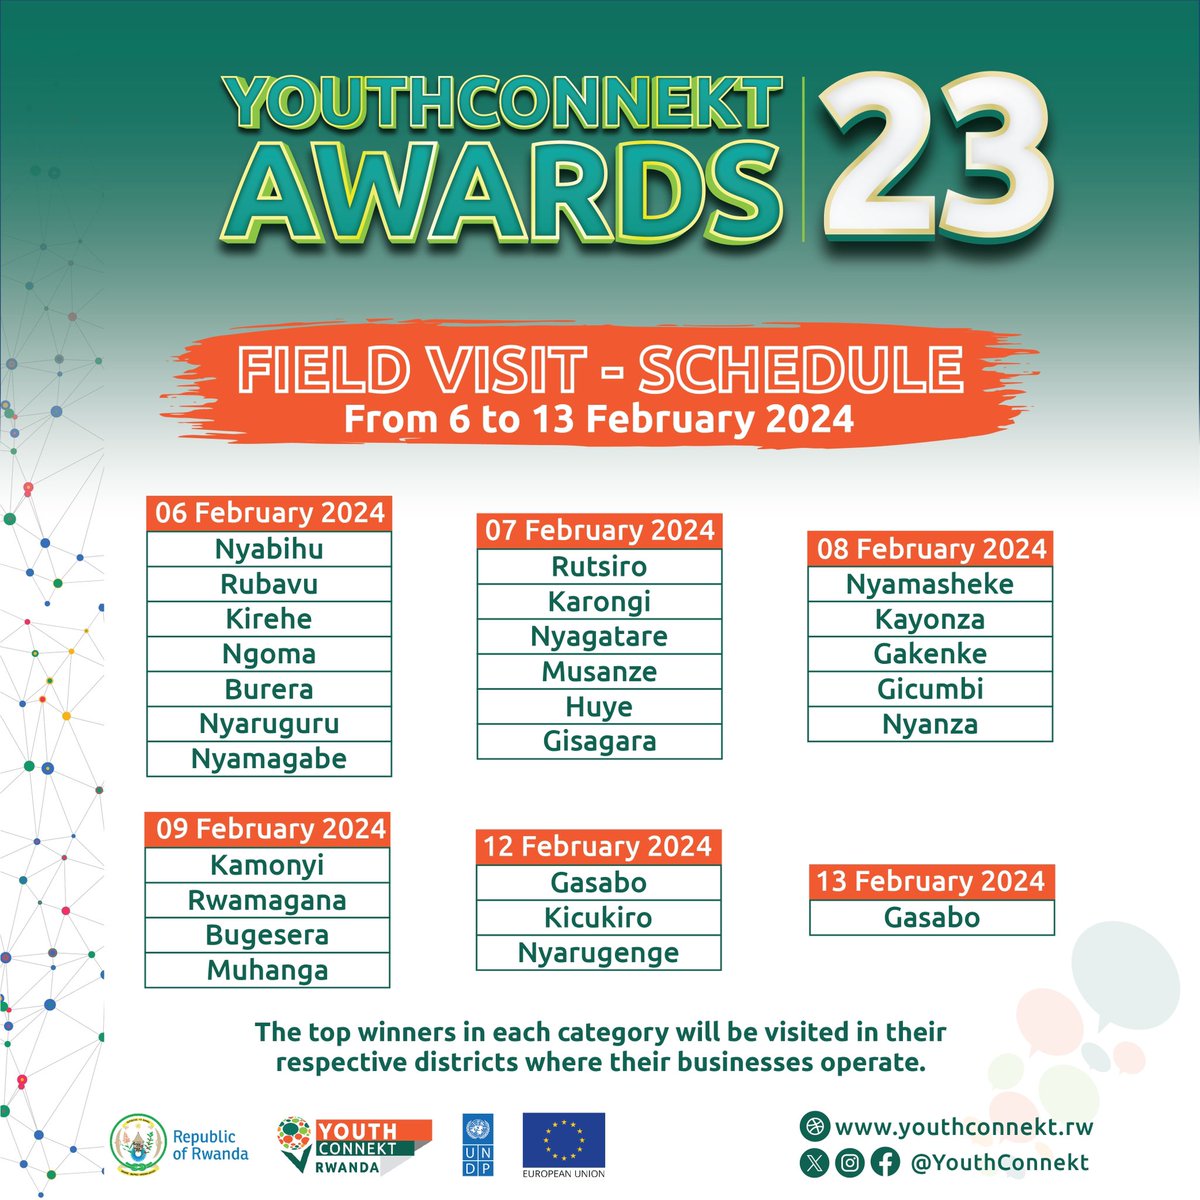 🚨After the bootcamp, the top winners in each category are going to be visited from 6 to 13 February 2024. Get ready! #YCA2023